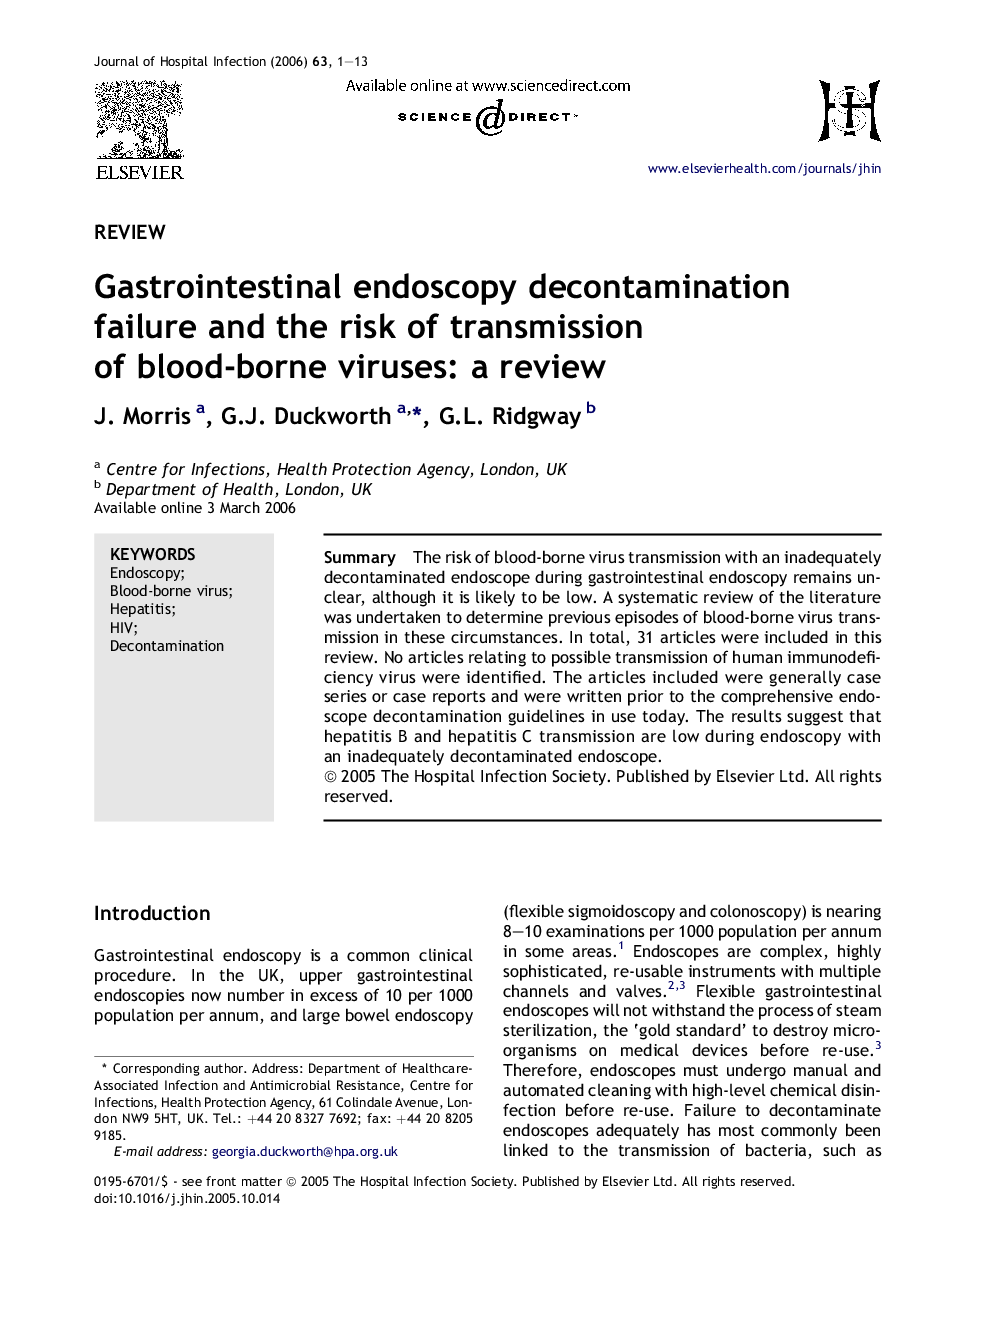 Gastrointestinal endoscopy decontamination failure and the risk of transmission of blood-borne viruses: a review